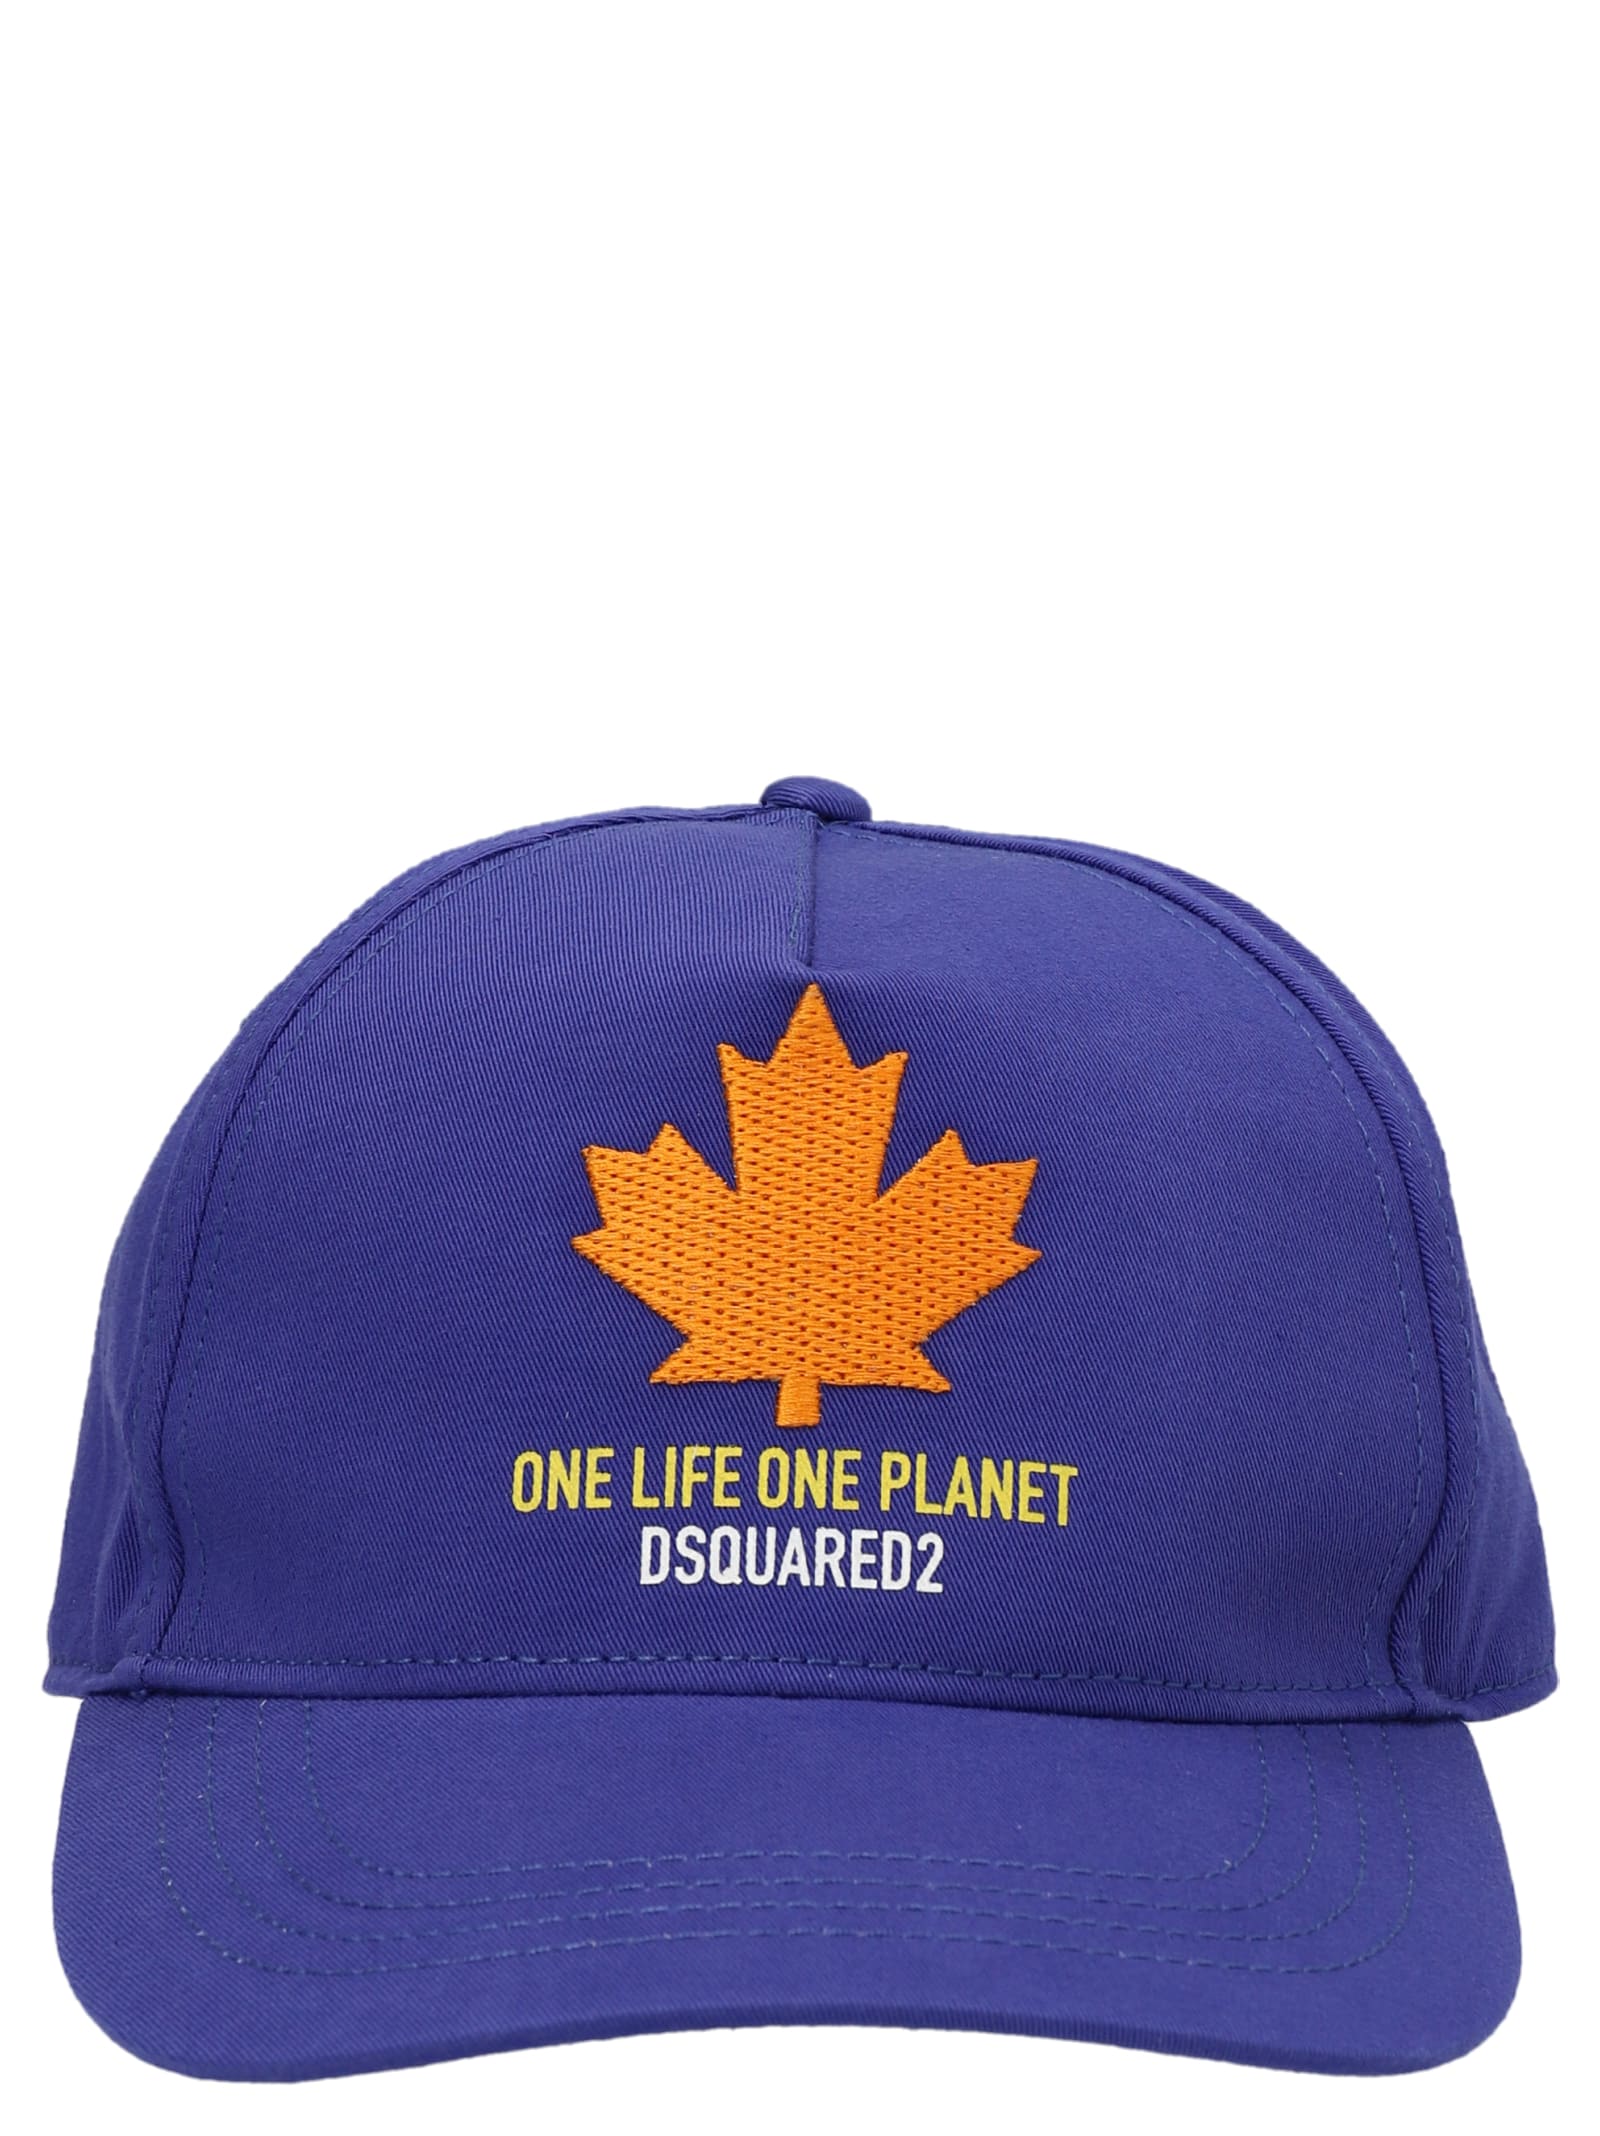 DSQUARED2 ONE LIFE ONE PLANET CAP